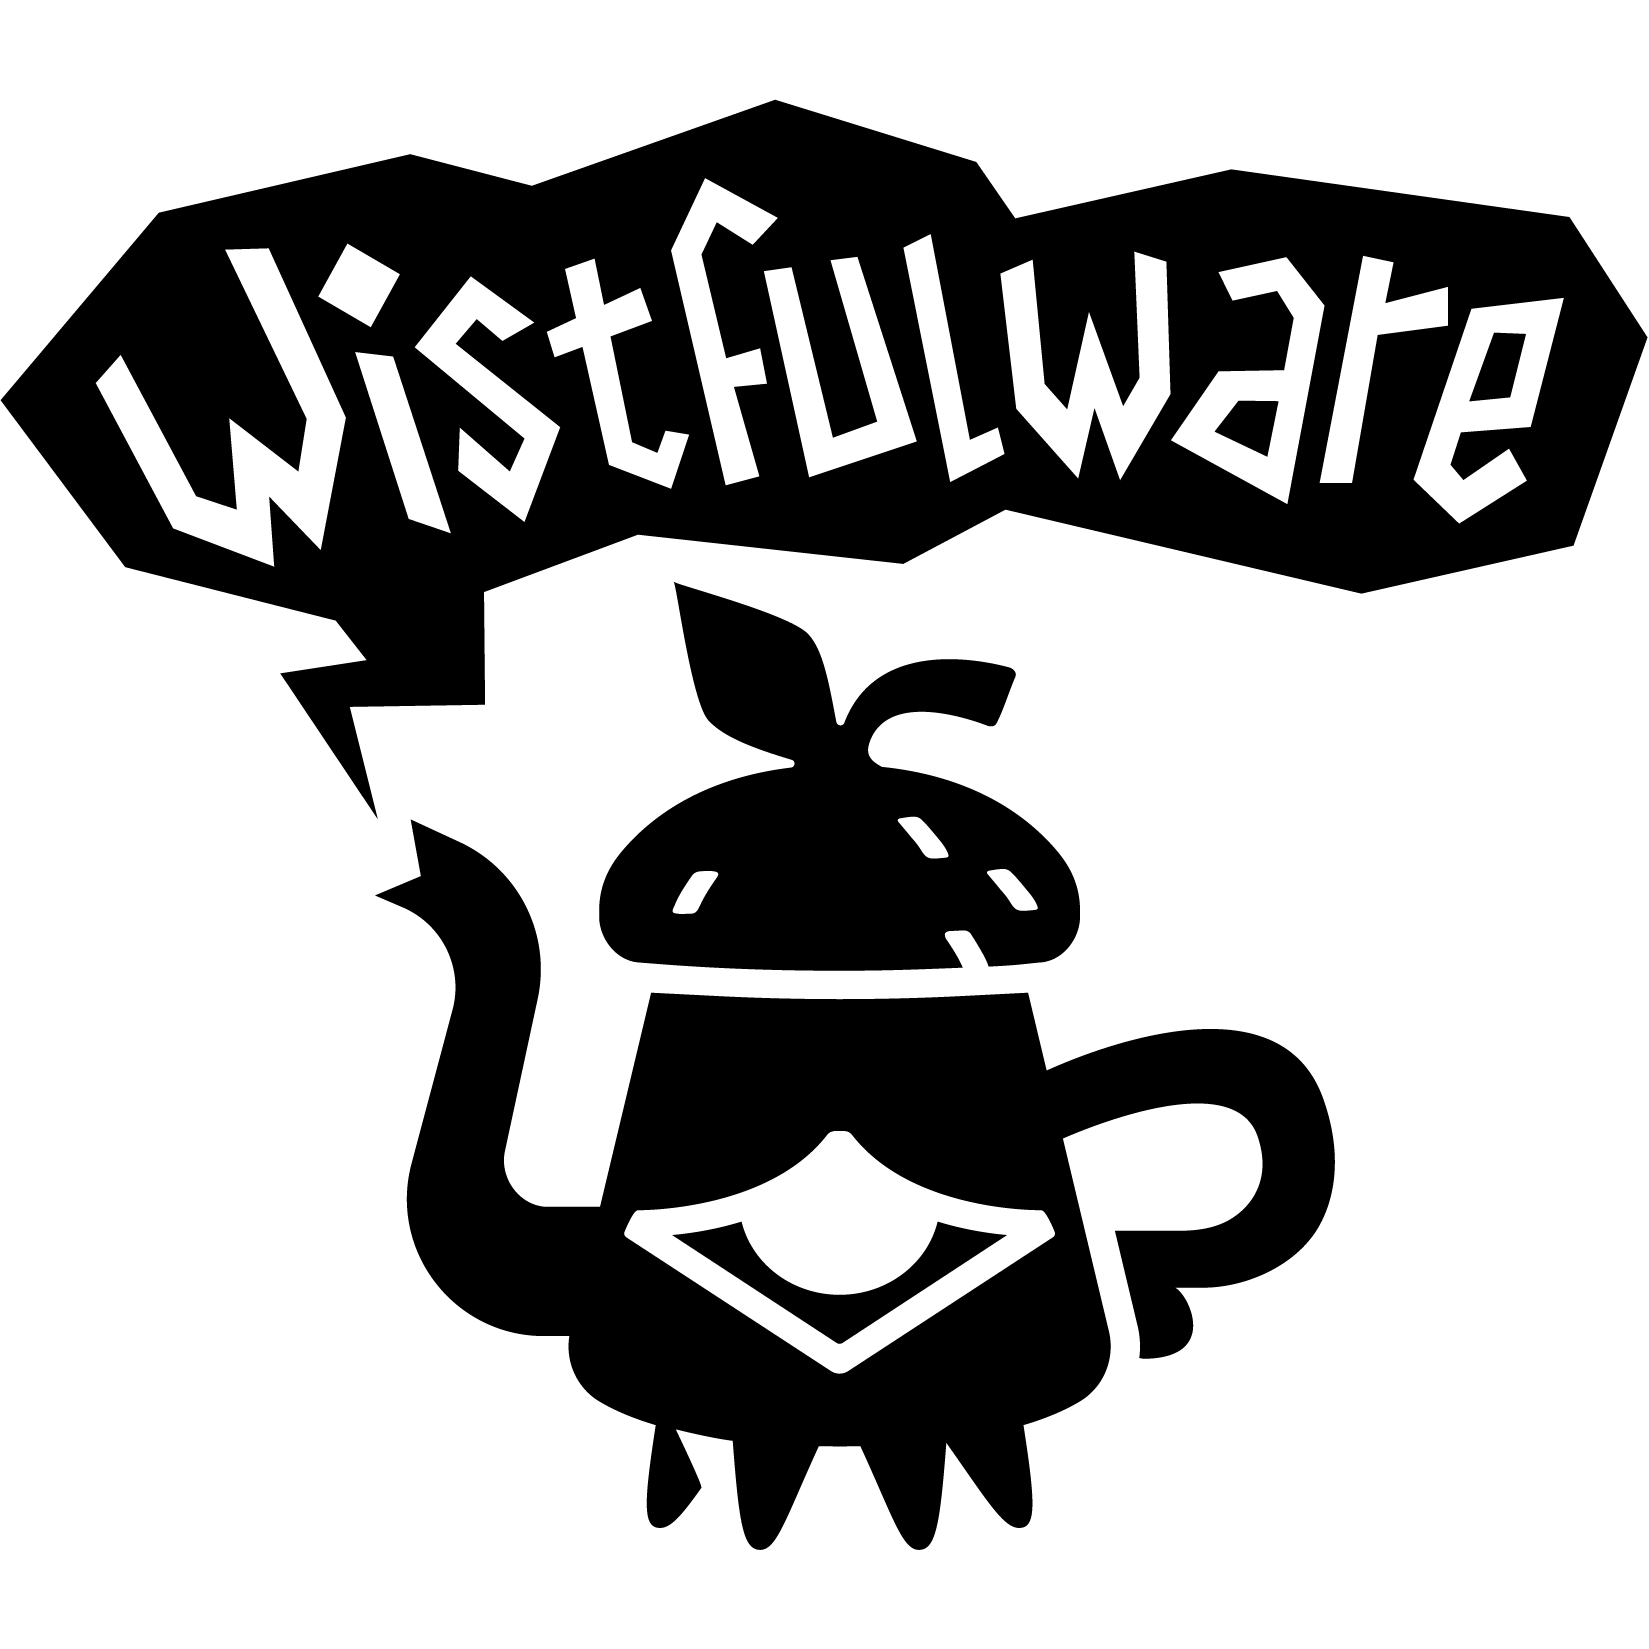 The logo of Wistfulware